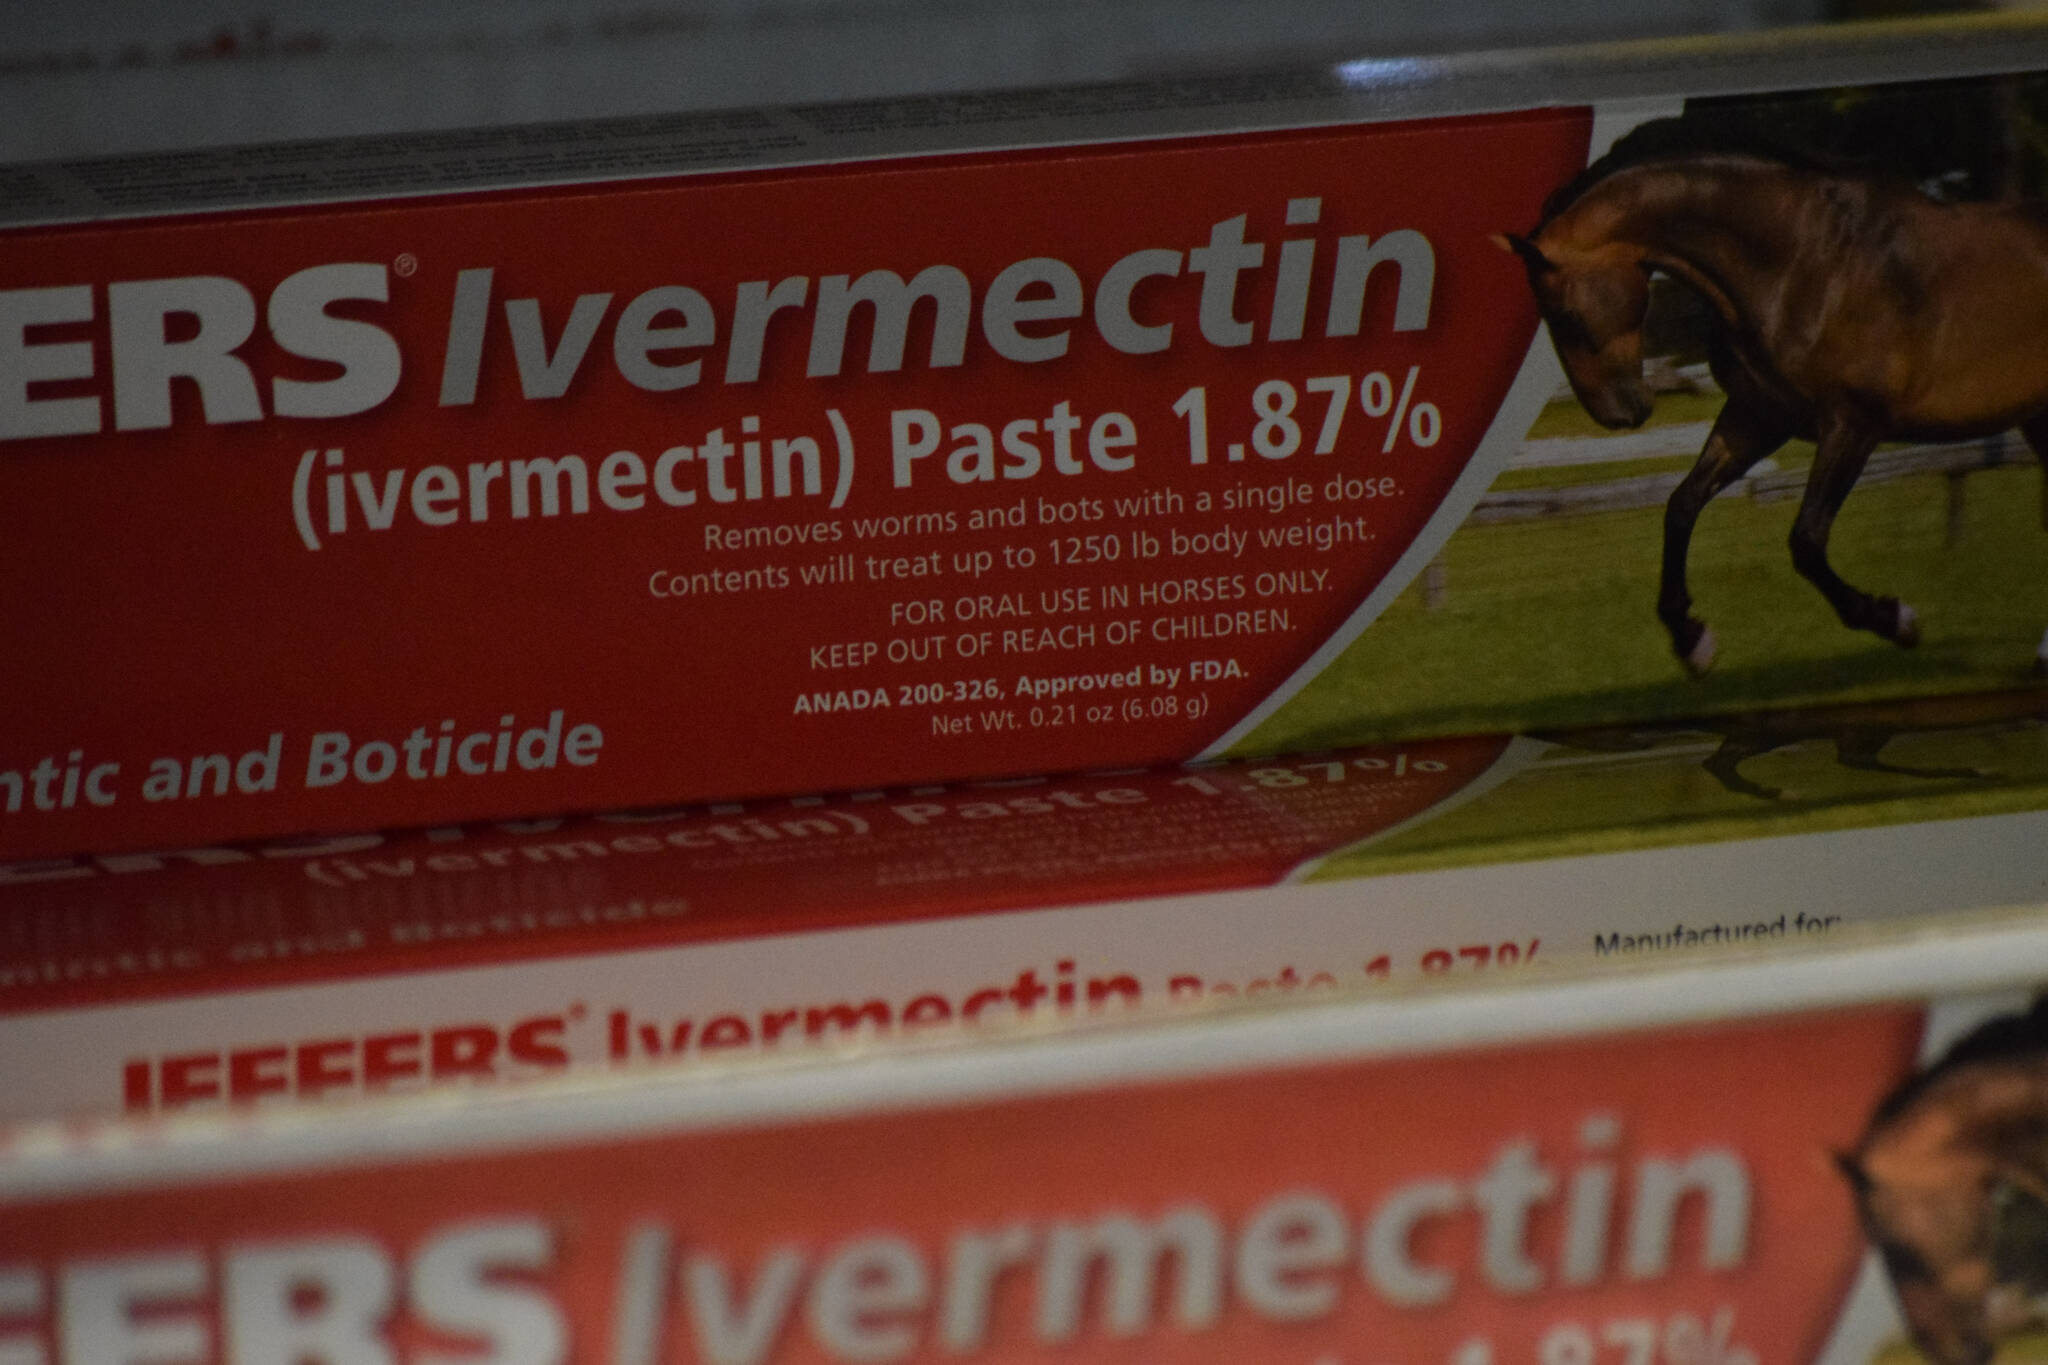 Horse ivermectin paste is for sale at Kenai Feed and Supply on Tuesday, Aug. 24, 2021. (Camille Botello/Peninsula Clarion)